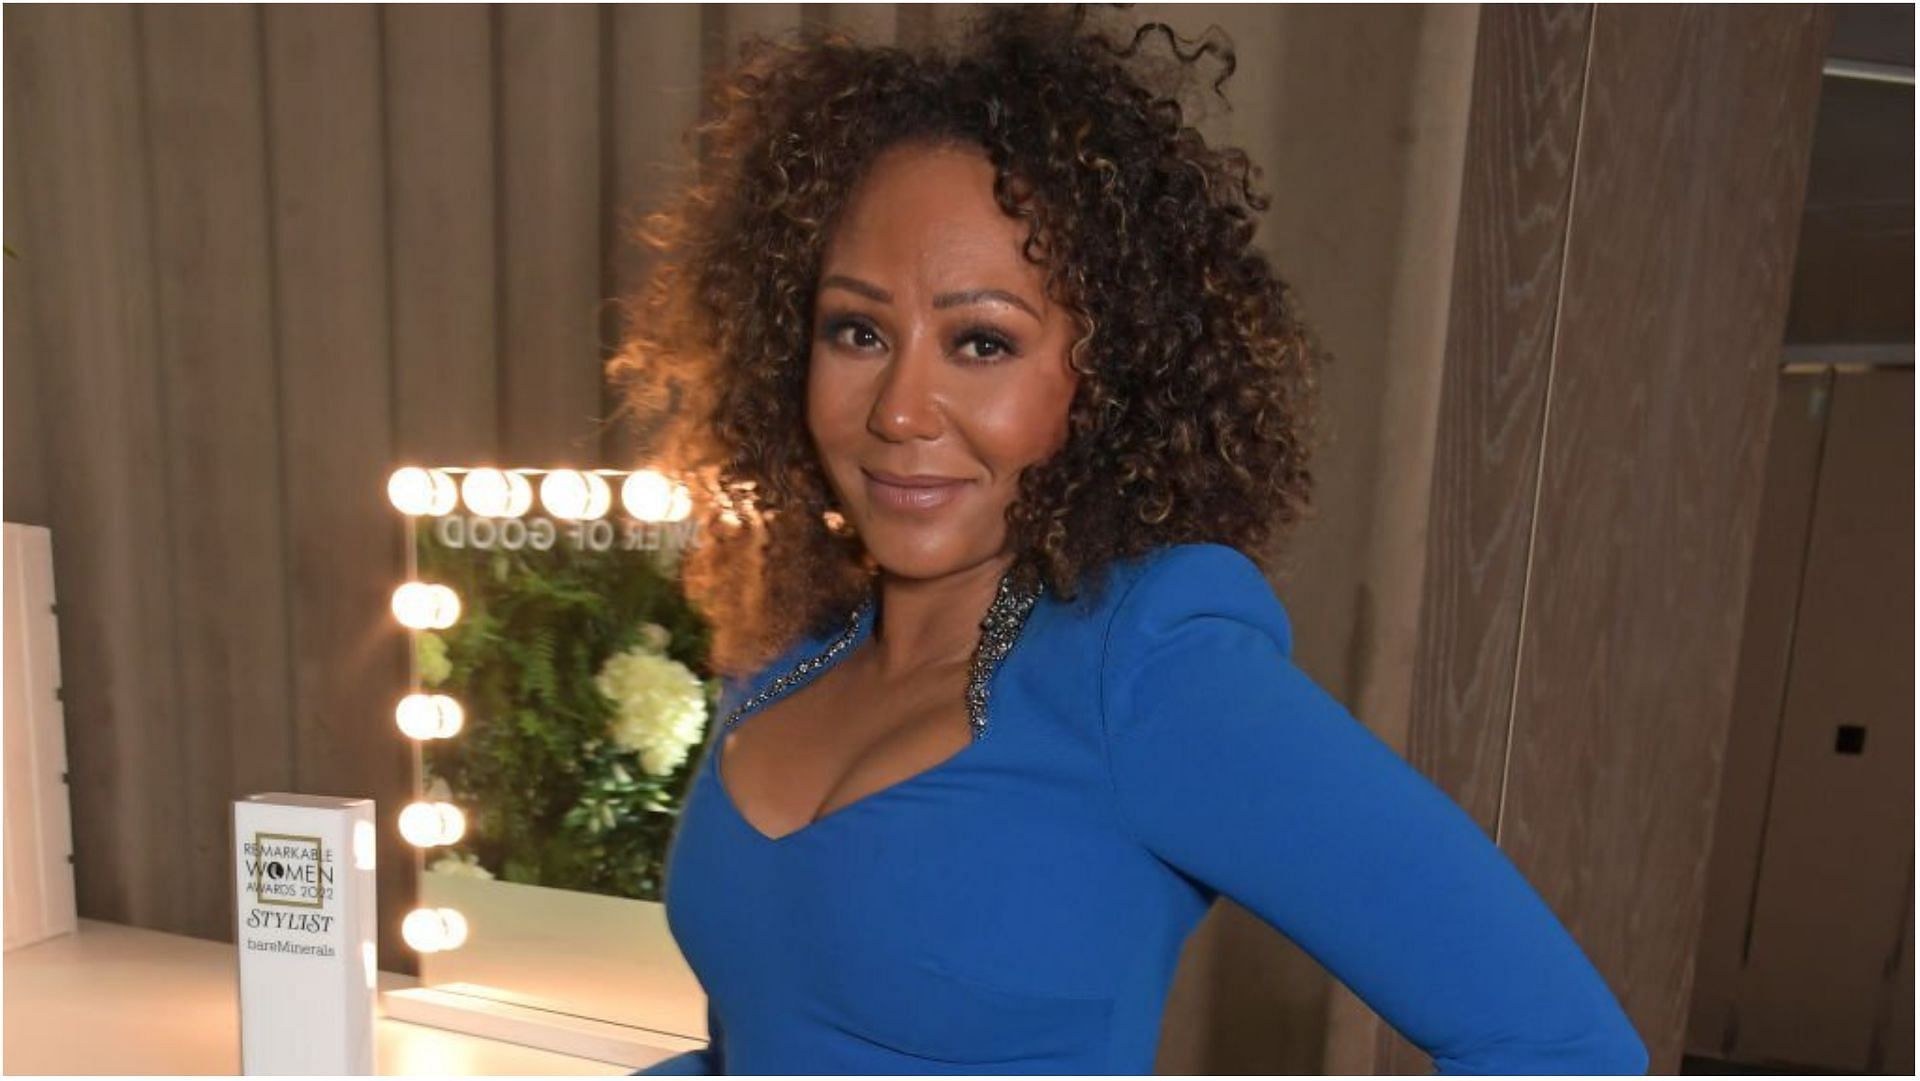 Mel B accumulated a lot of wealth from the entertainment industry (Image via David M. Benett/Getty Images)